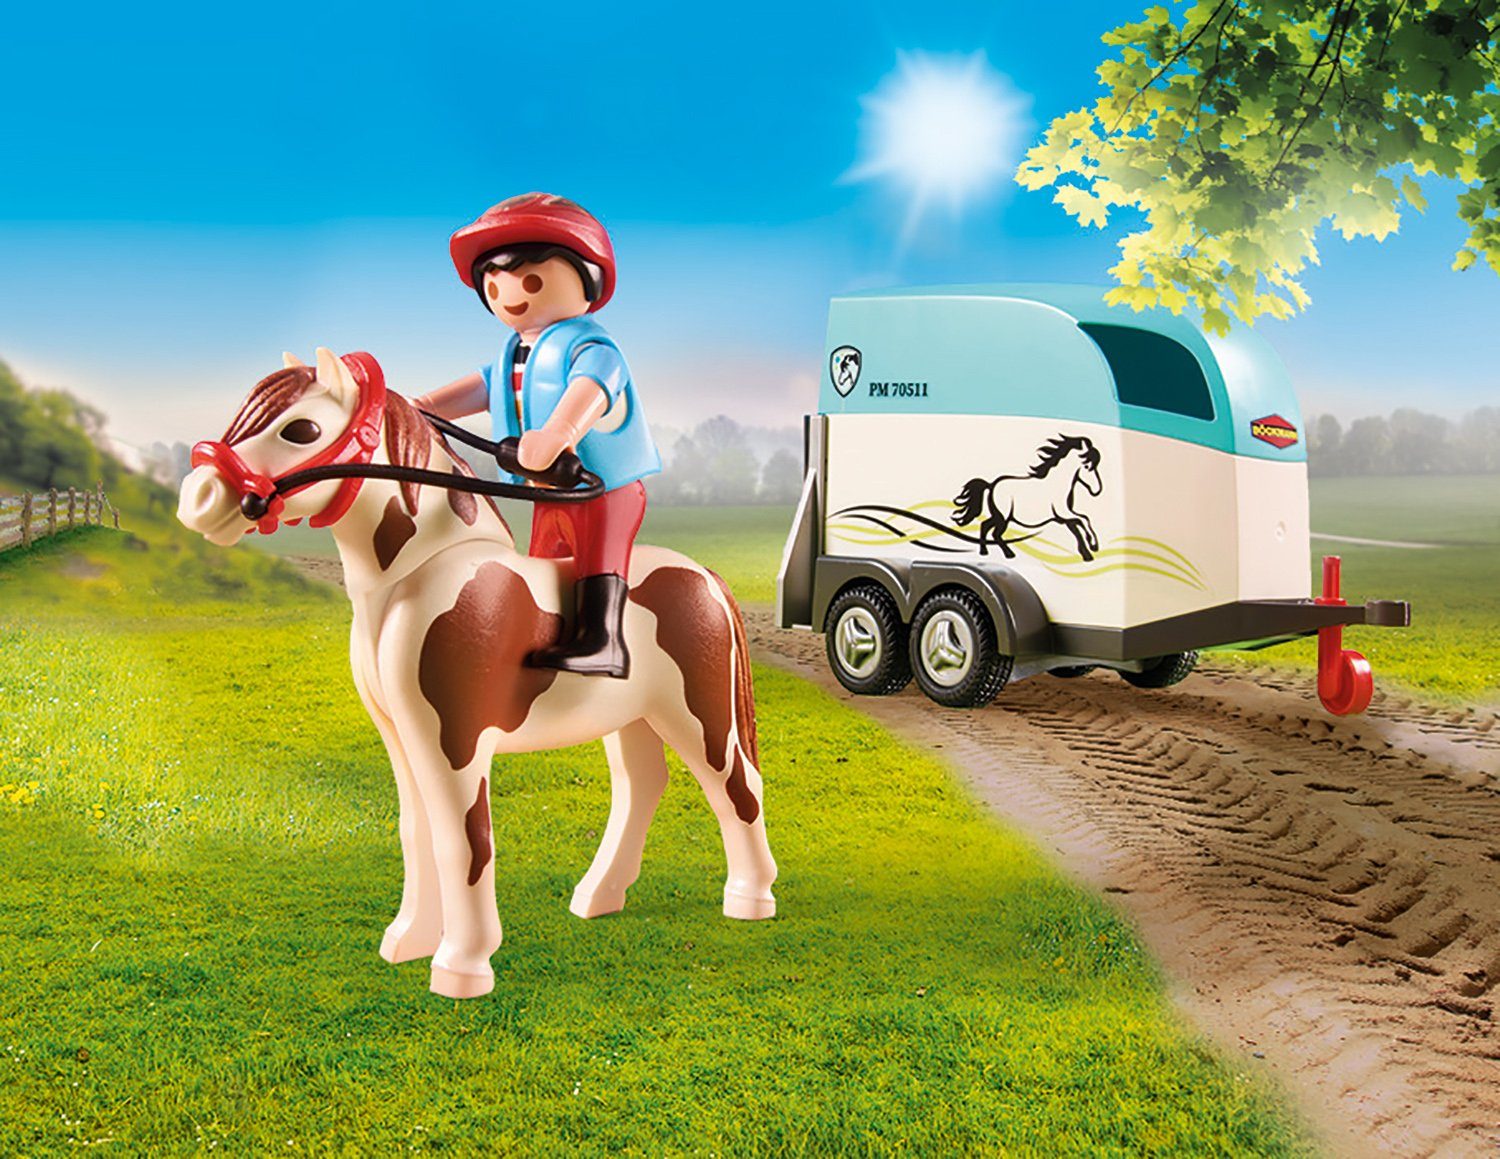 in Made mit Ponyanhänger Playmobil® Konstruktions-Spielset PKW (70511), (44 Country, St), Germany